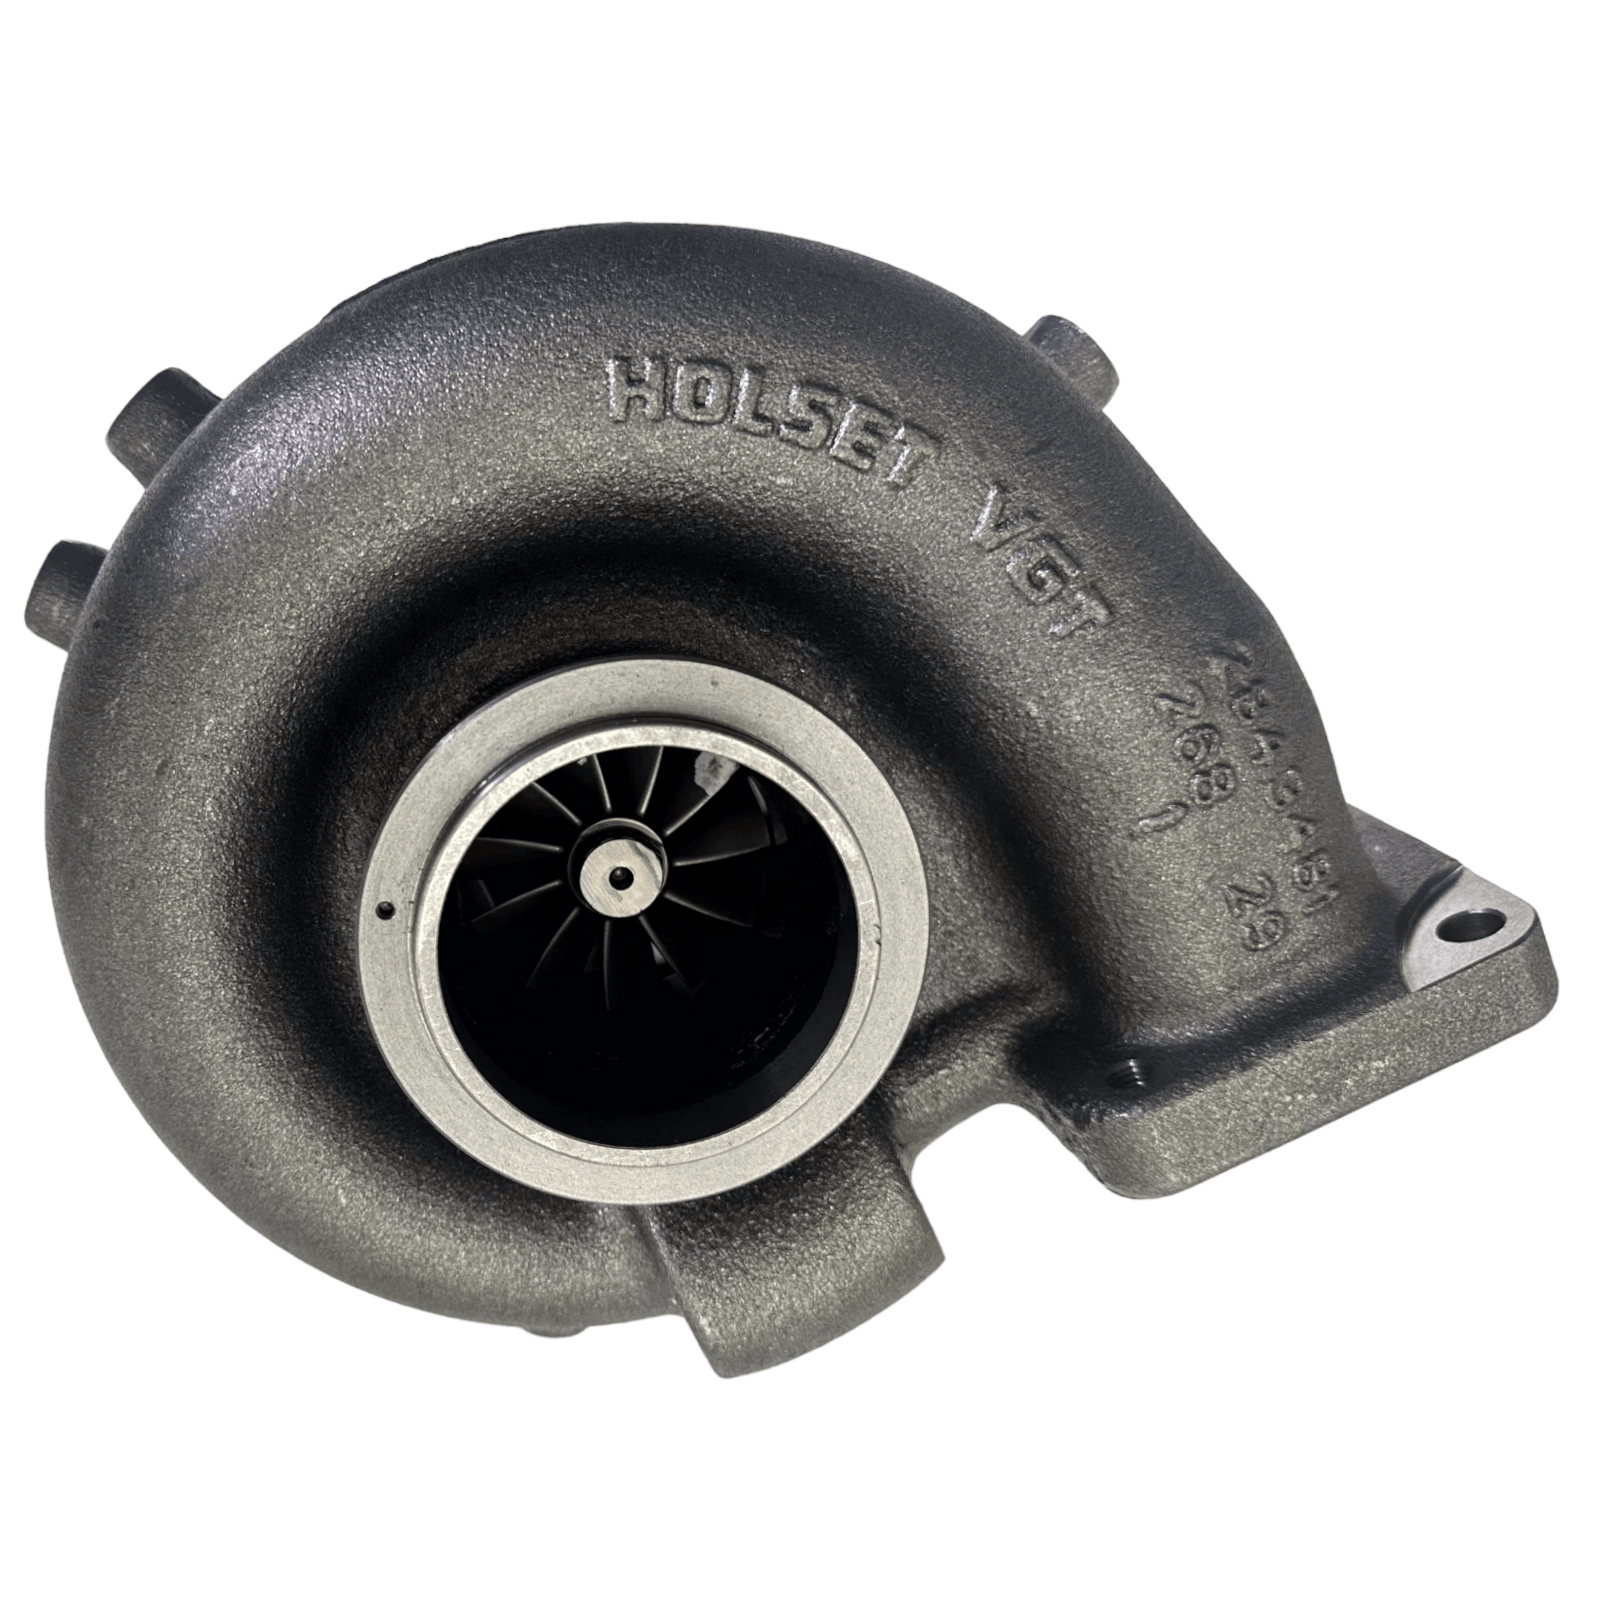 5357368 Genuine Cummins Turbocharger For Isx15 - ADVANCED TRUCK PARTS